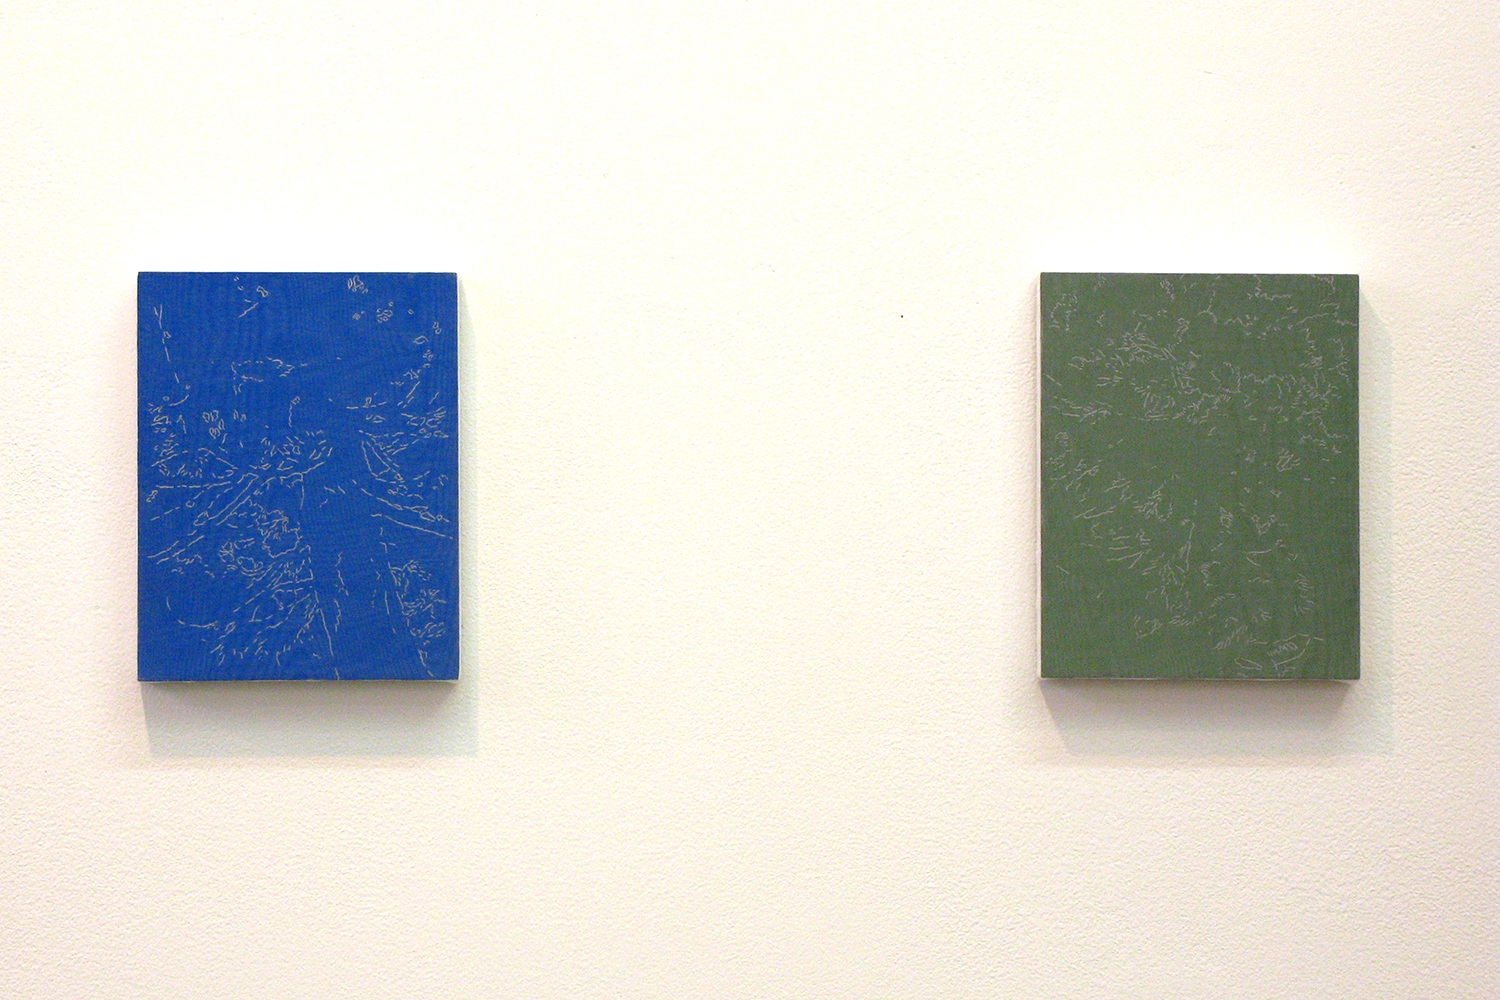 tree #1｜panel, stainless steel sheet, glass organdy, acrylic, pigment｜180 x 140 mm｜2008（right）<br>tree #2｜panel, stainless steel sheet, glass organdy, acrylic, pigment｜180 x 140 mm｜2008（left）